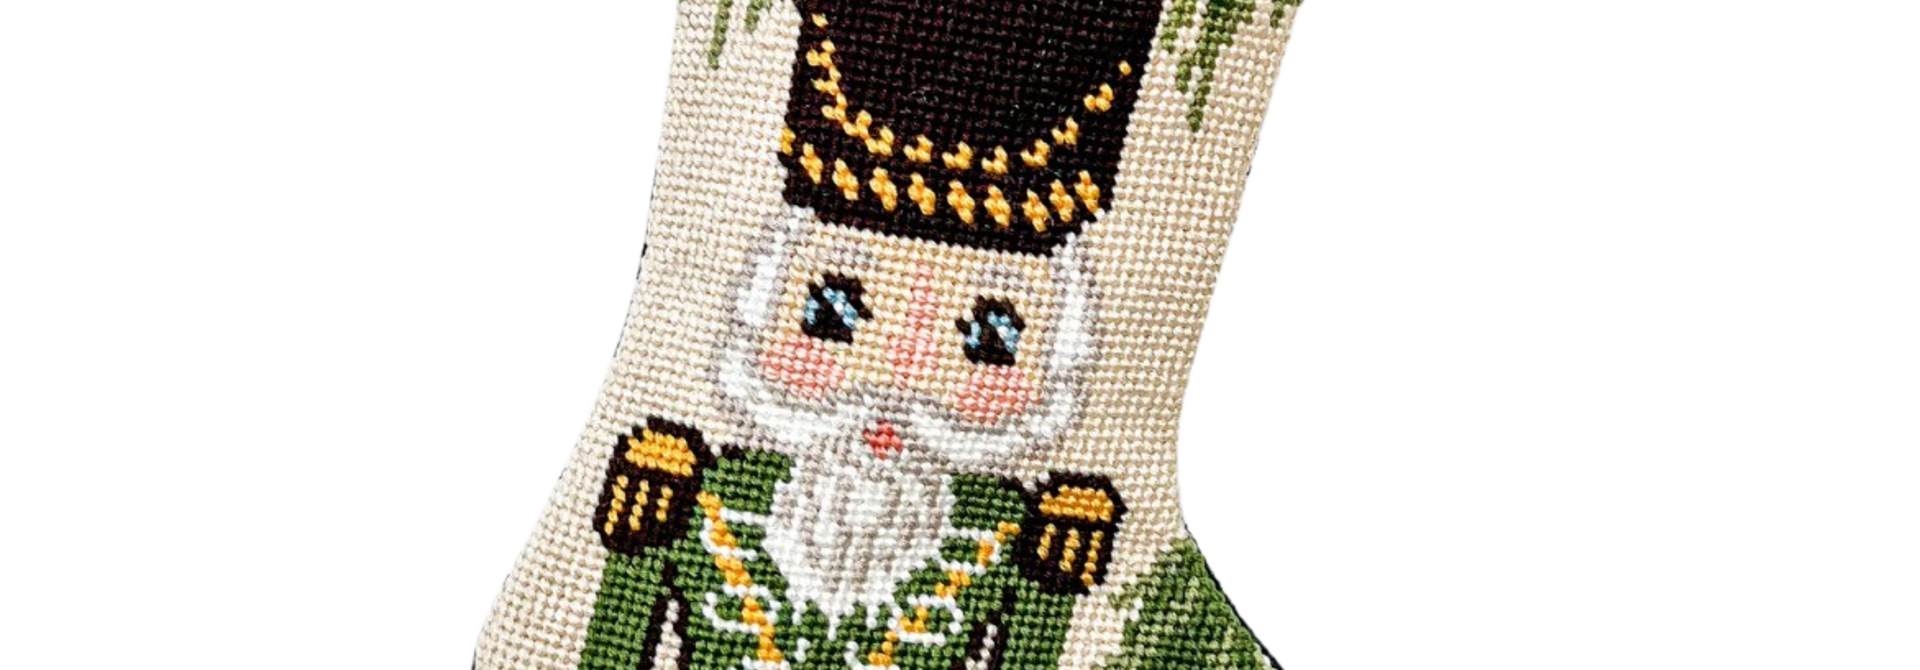 Nutcracker in Green | The Bauble Stocking Collection - 4.25 Inch x 6 Inch